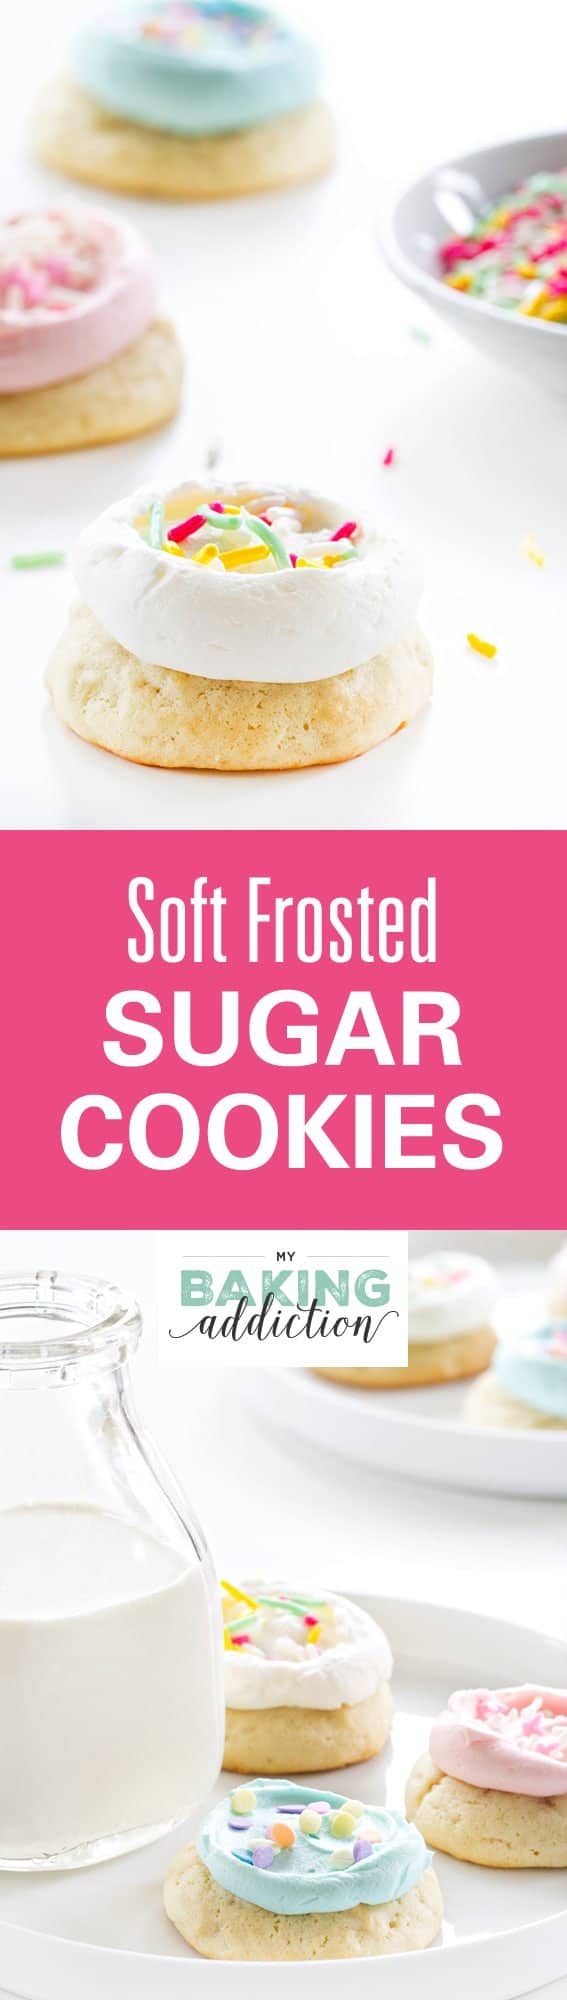 Soft Frosted Sugar Cookies are soft, cakey, and delicious. A swirl of fluffy, pastel buttercream and sprinkles makes them perfect for spring. So delightful!